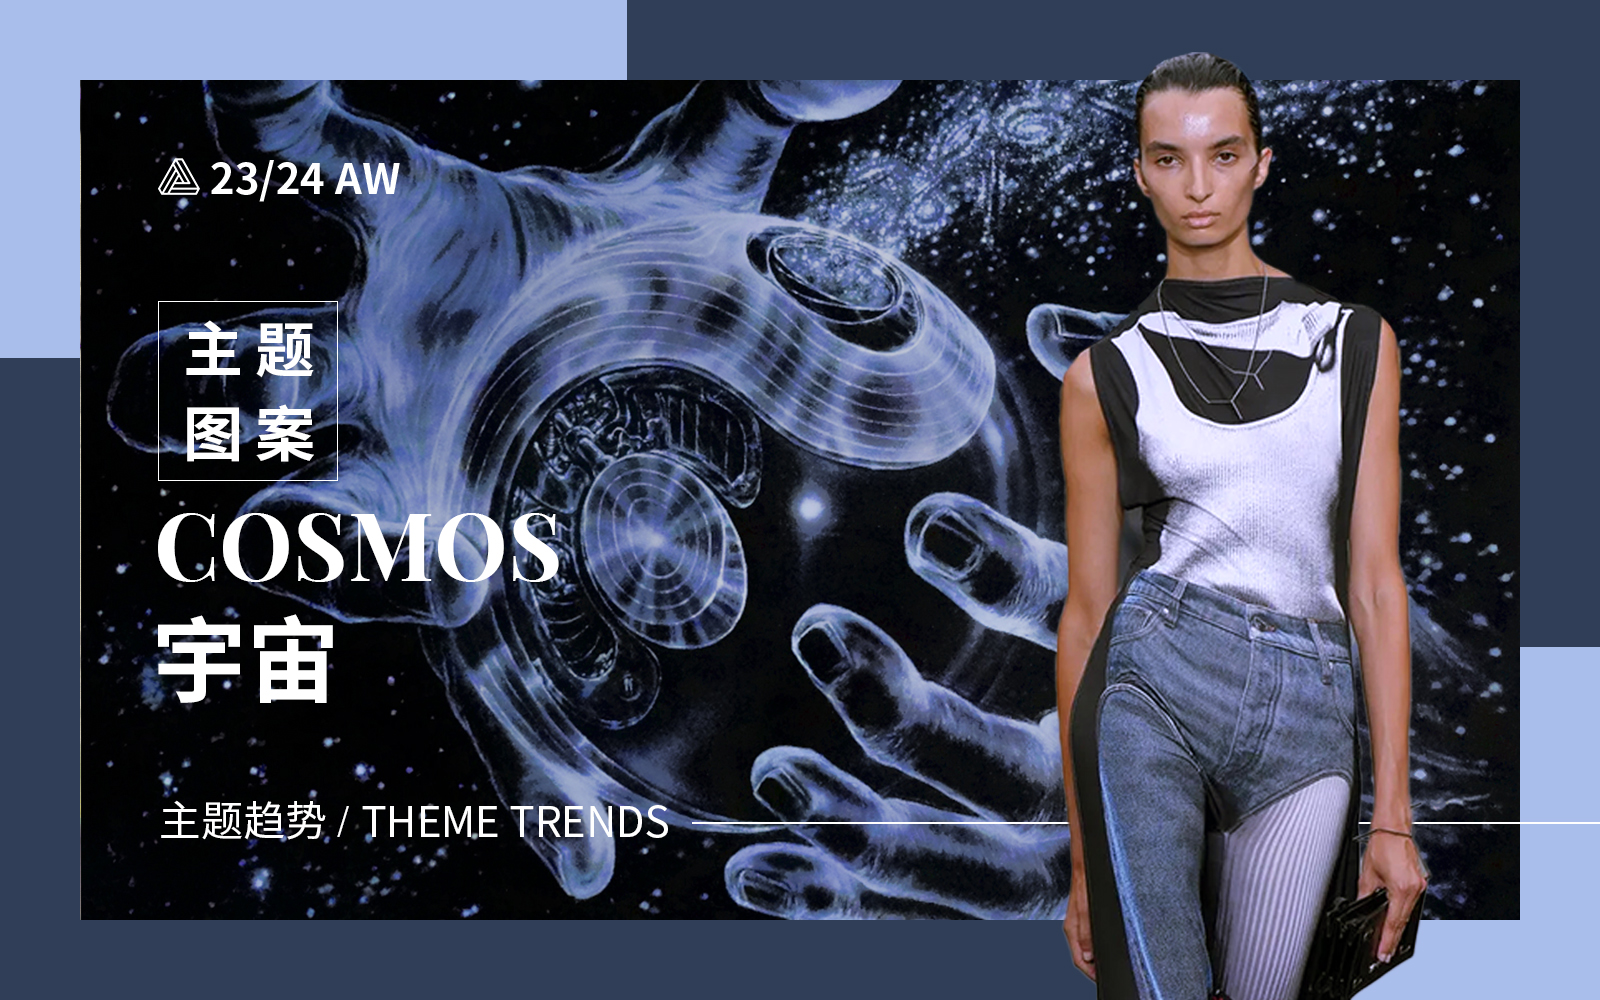 COSMOS -- The A/W 23/24 Thematic Pattern Trend